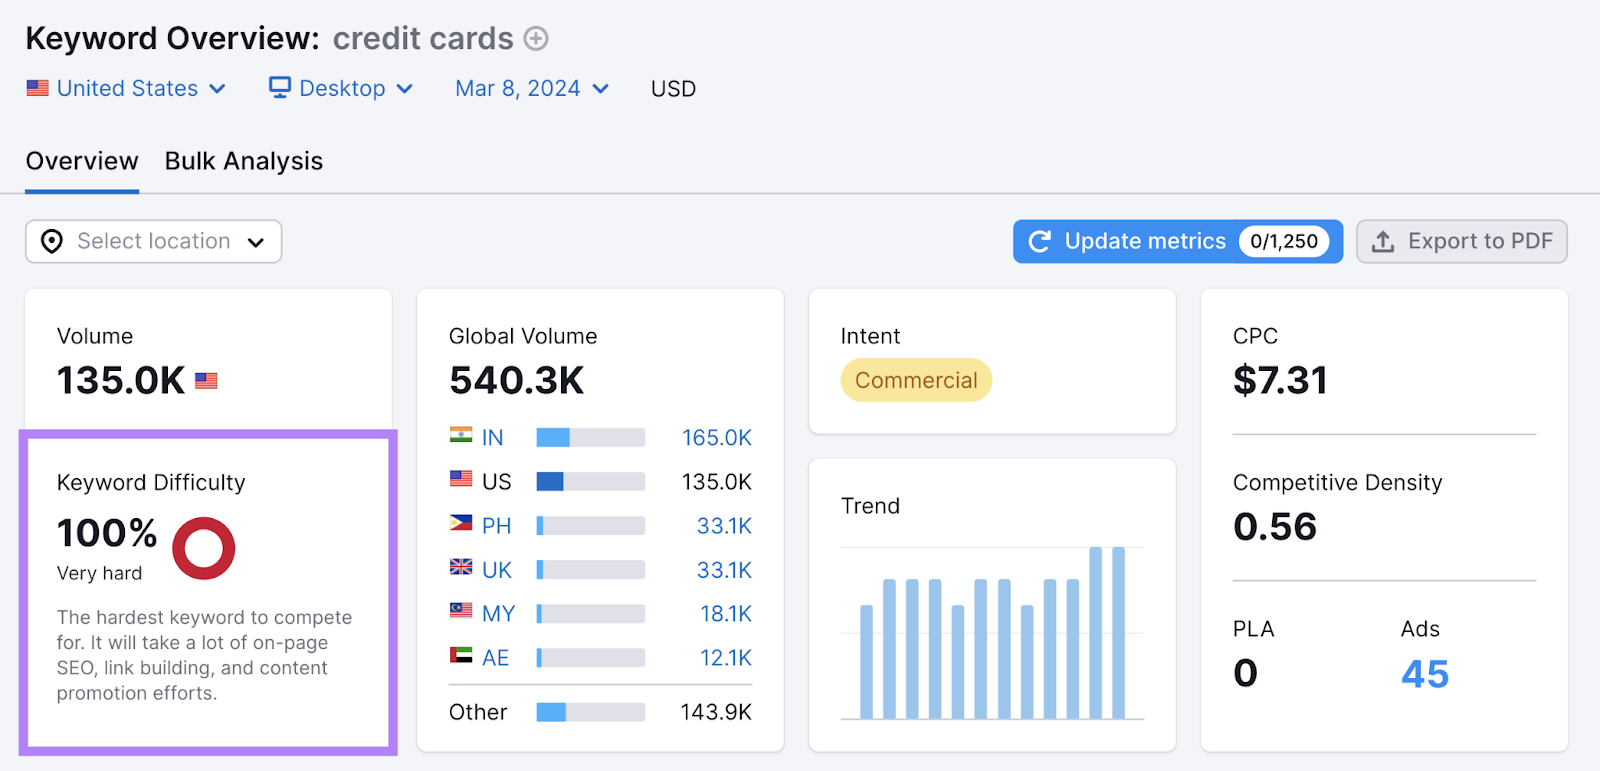 Keyword trouble  metric for "credit cards" shown successful  Keyword Overview